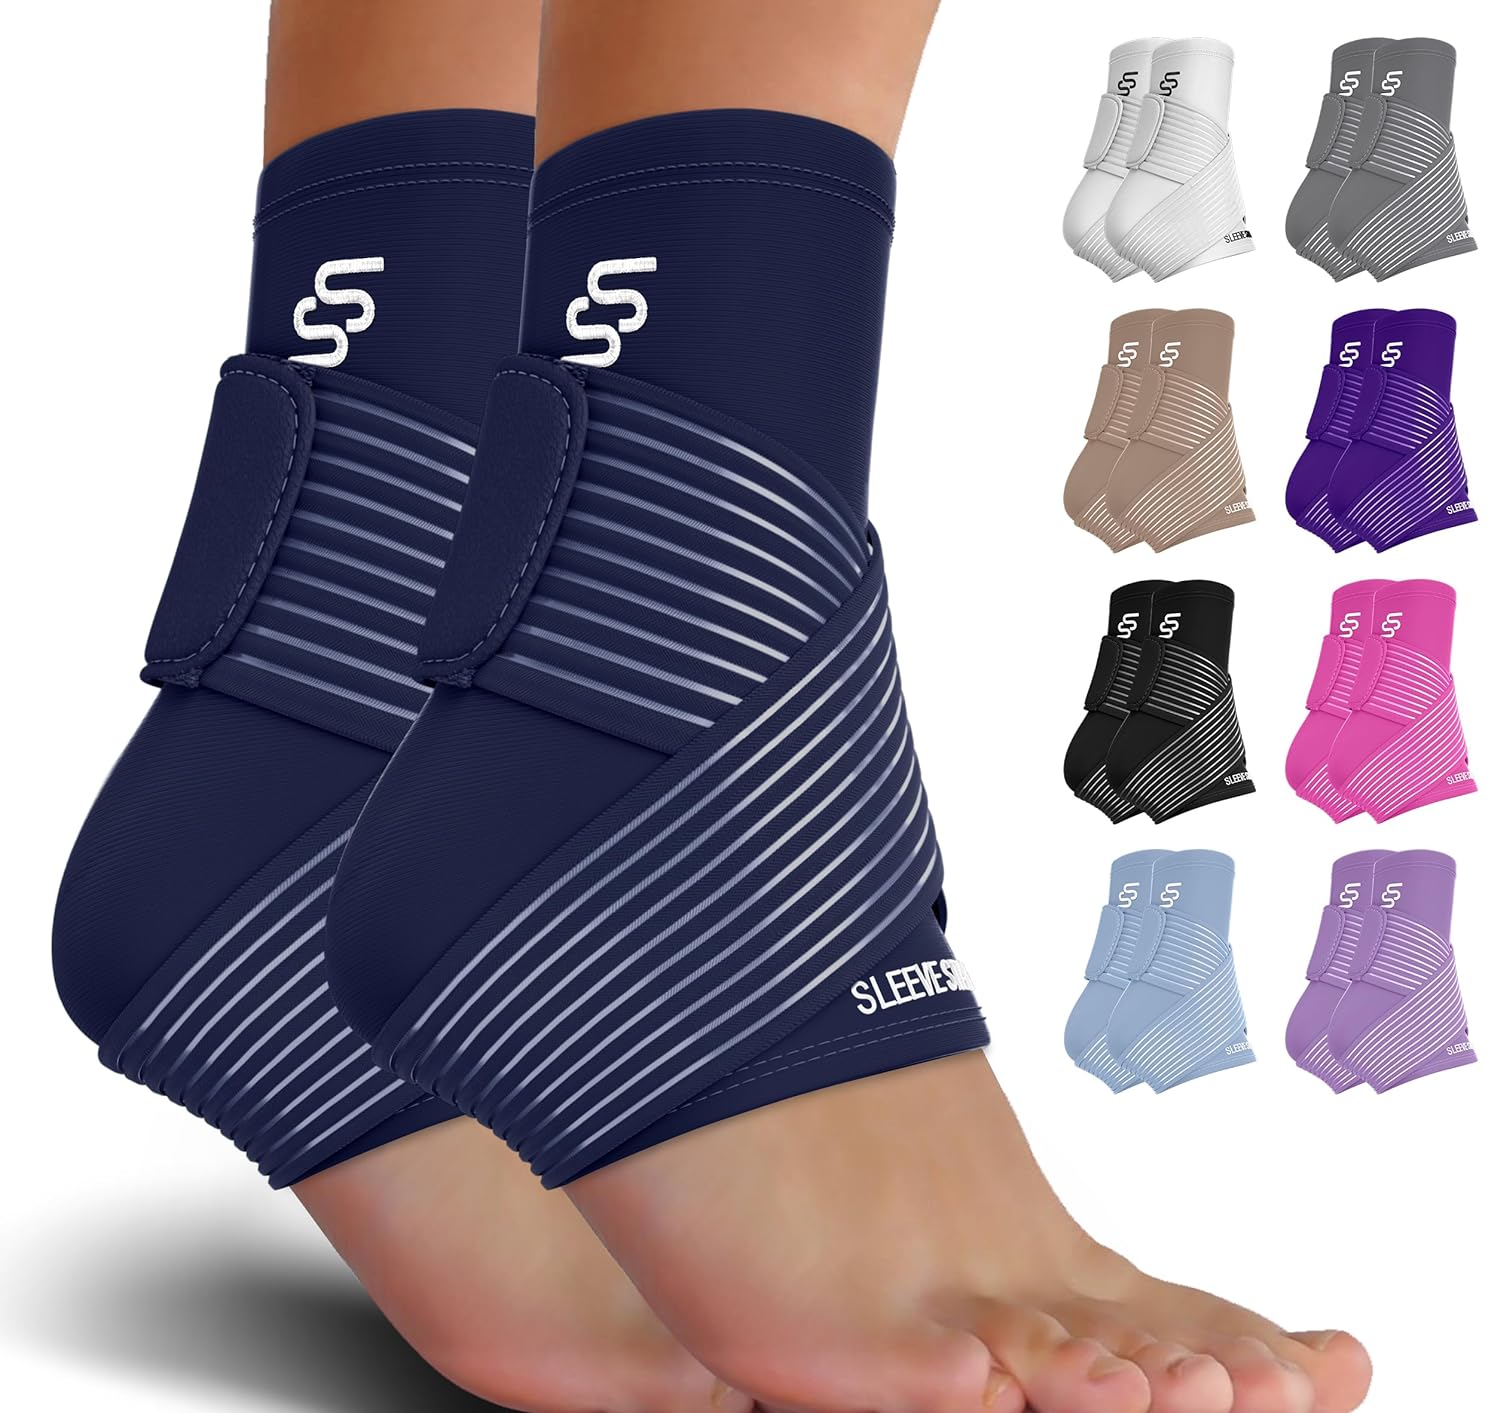 Sleeve Stars Ankle Support for Ligament Damage  Sprained Ankle, Plantar Fasciitis Support  Achilles Tendonitis Pain Relief, Ankle Brace for Women  Men w/Compression Ankle Strap (Single/Light Blue)